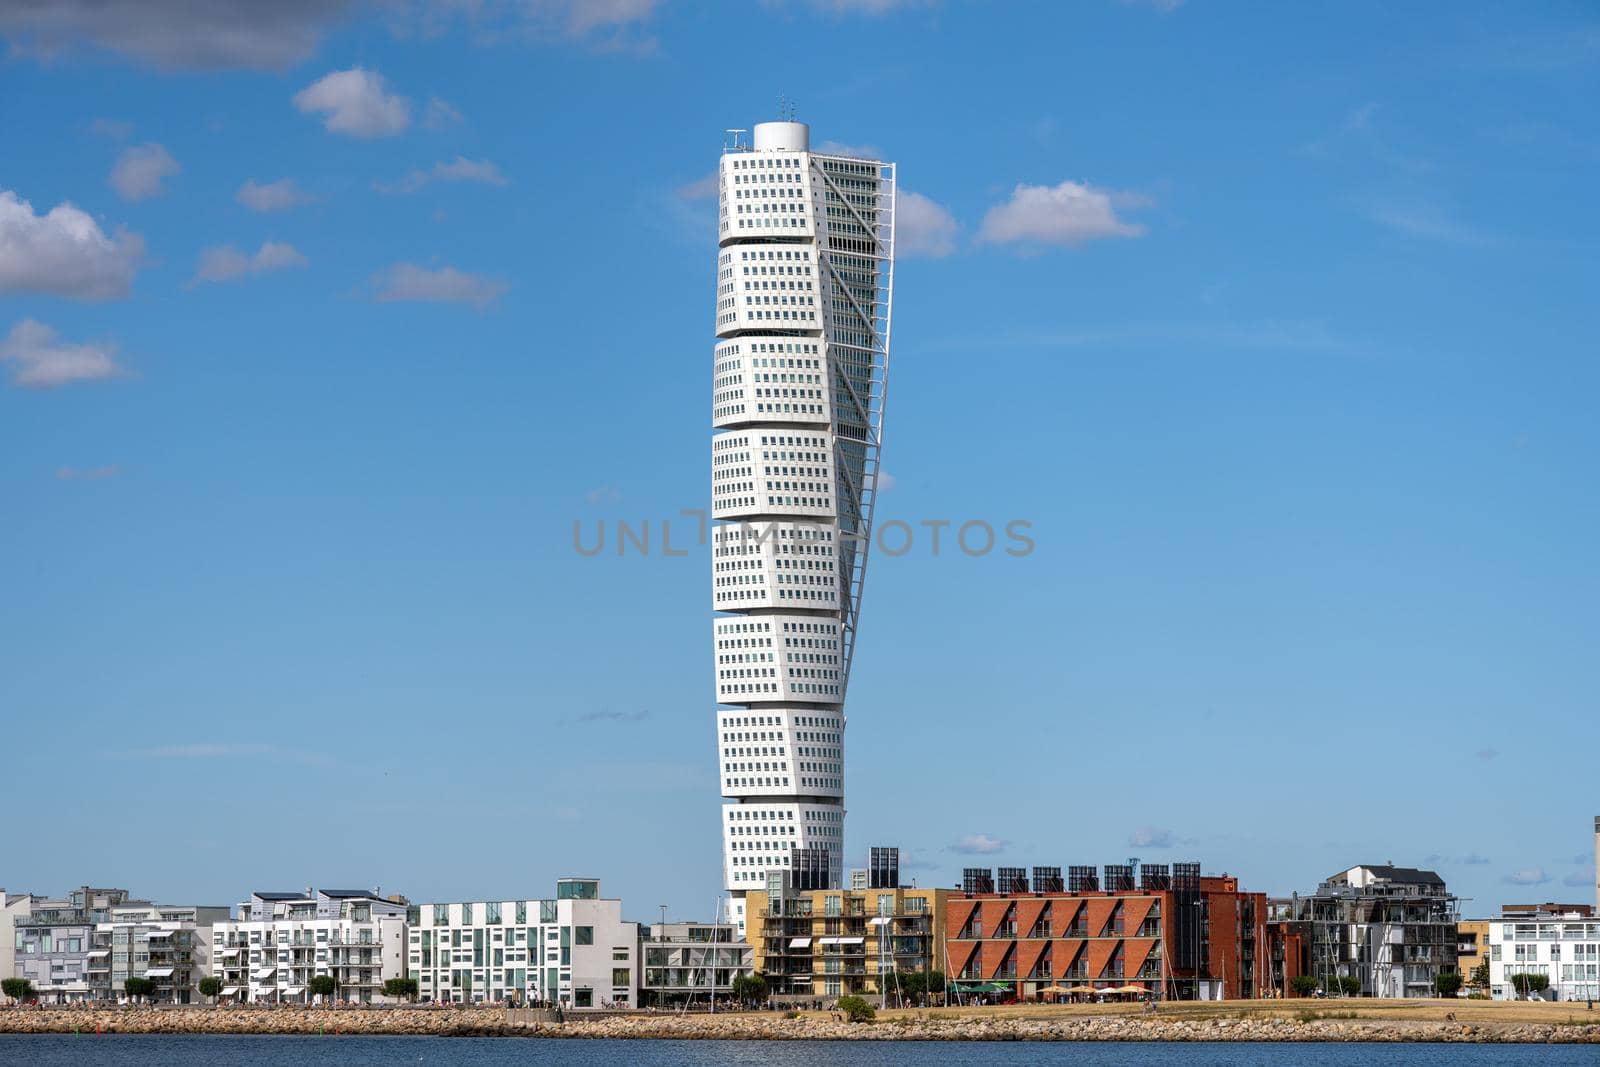 The Turning Torso in Malmo, Sweden, on a sunny day